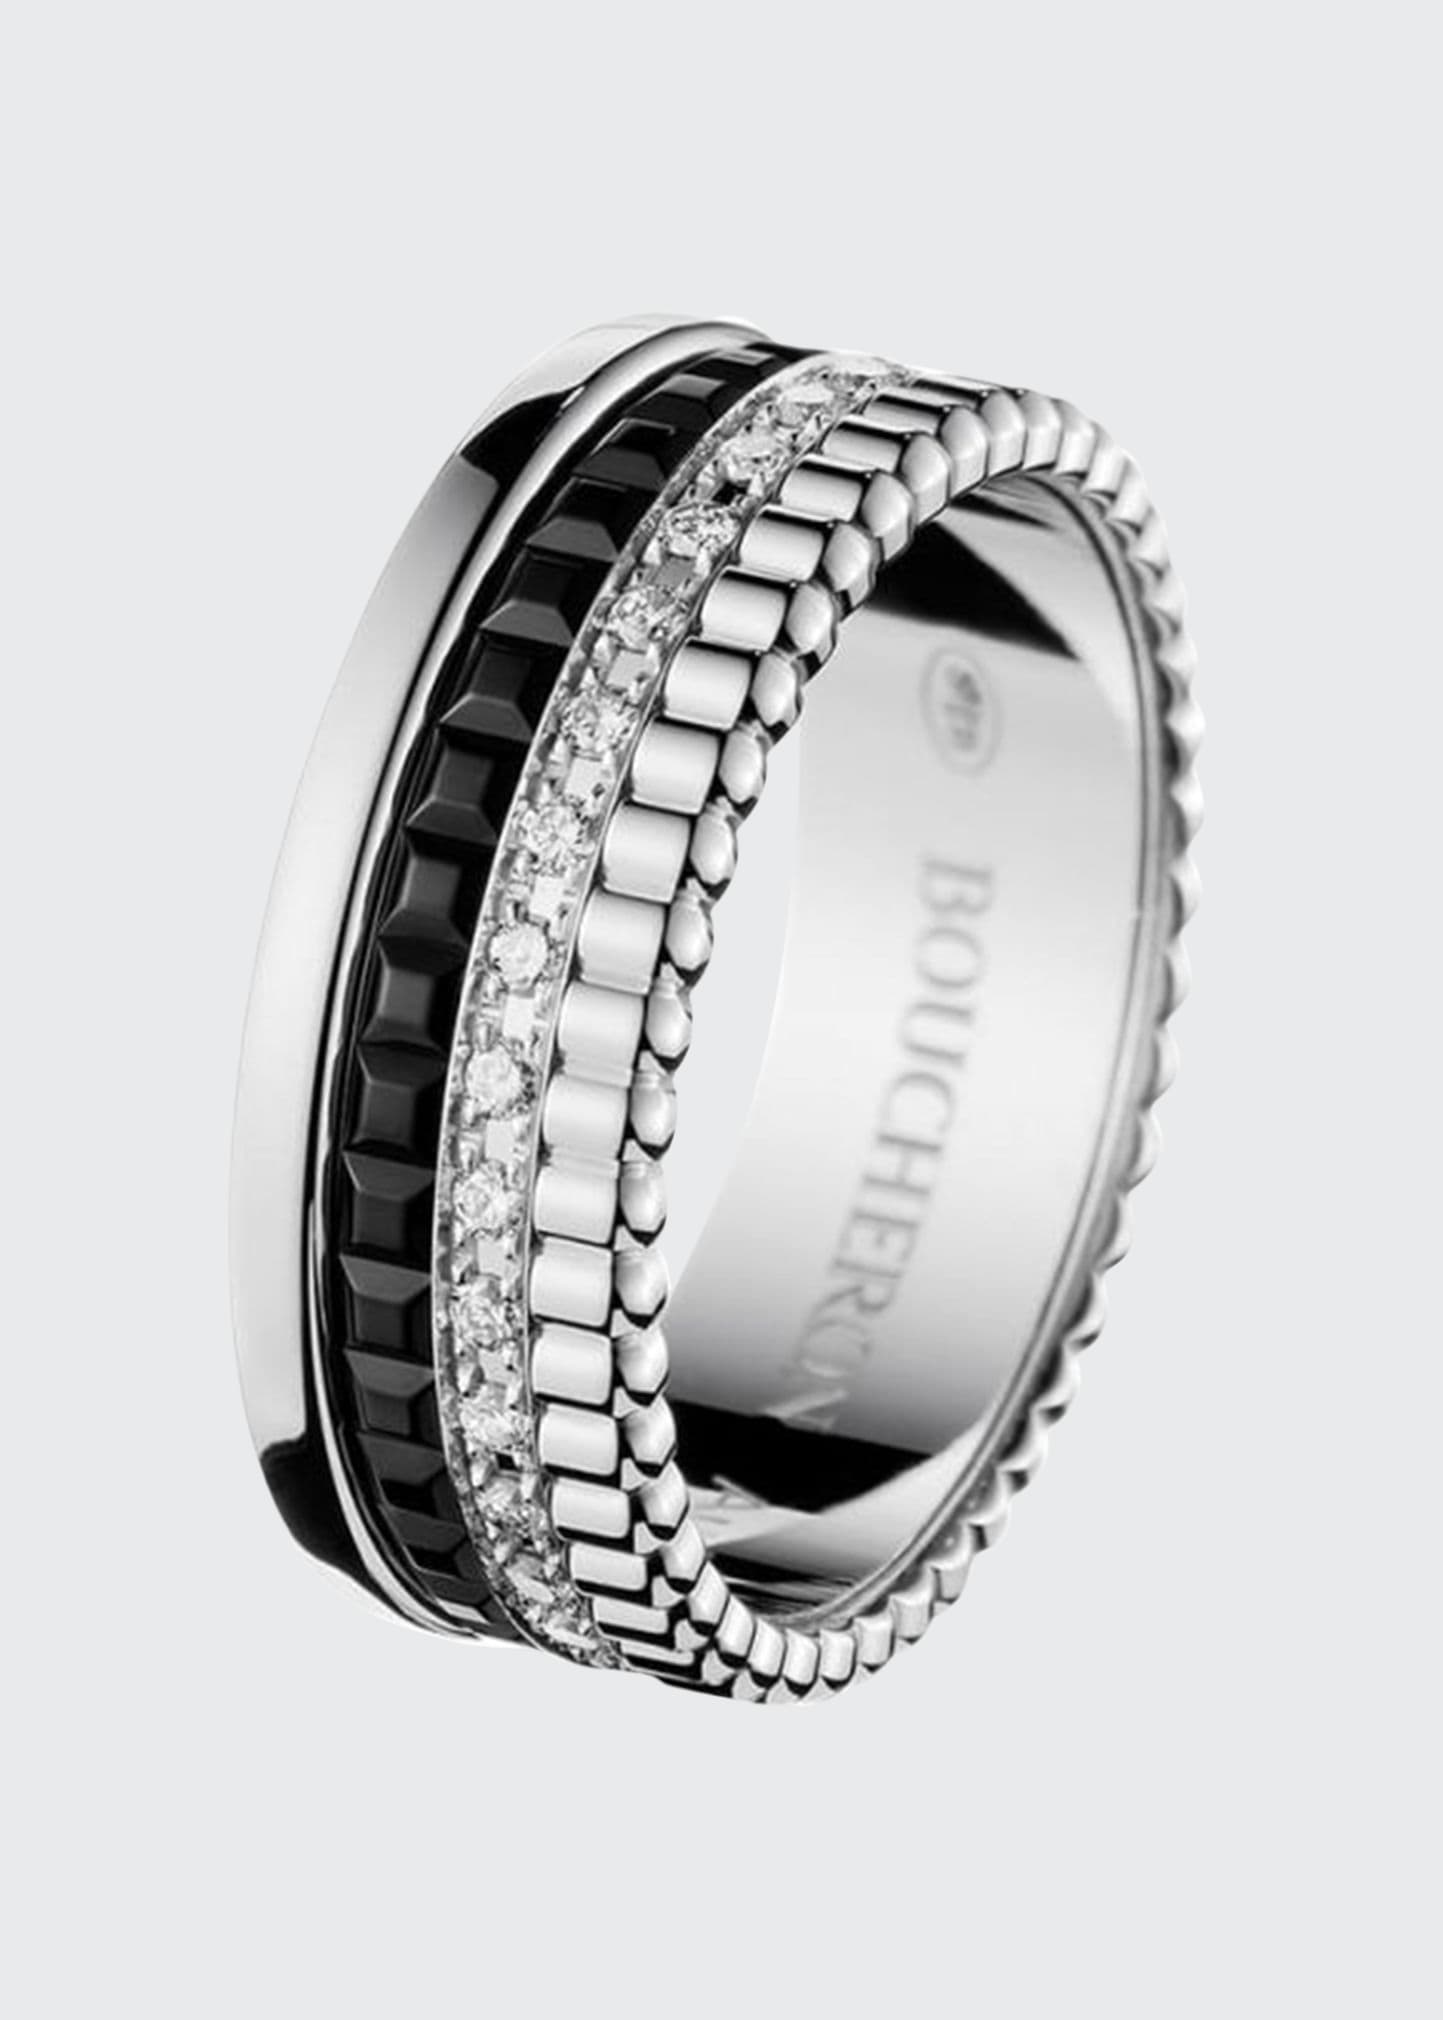 Boucheron Quatre Small Ring in White Gold with Diamonds and Black PVD